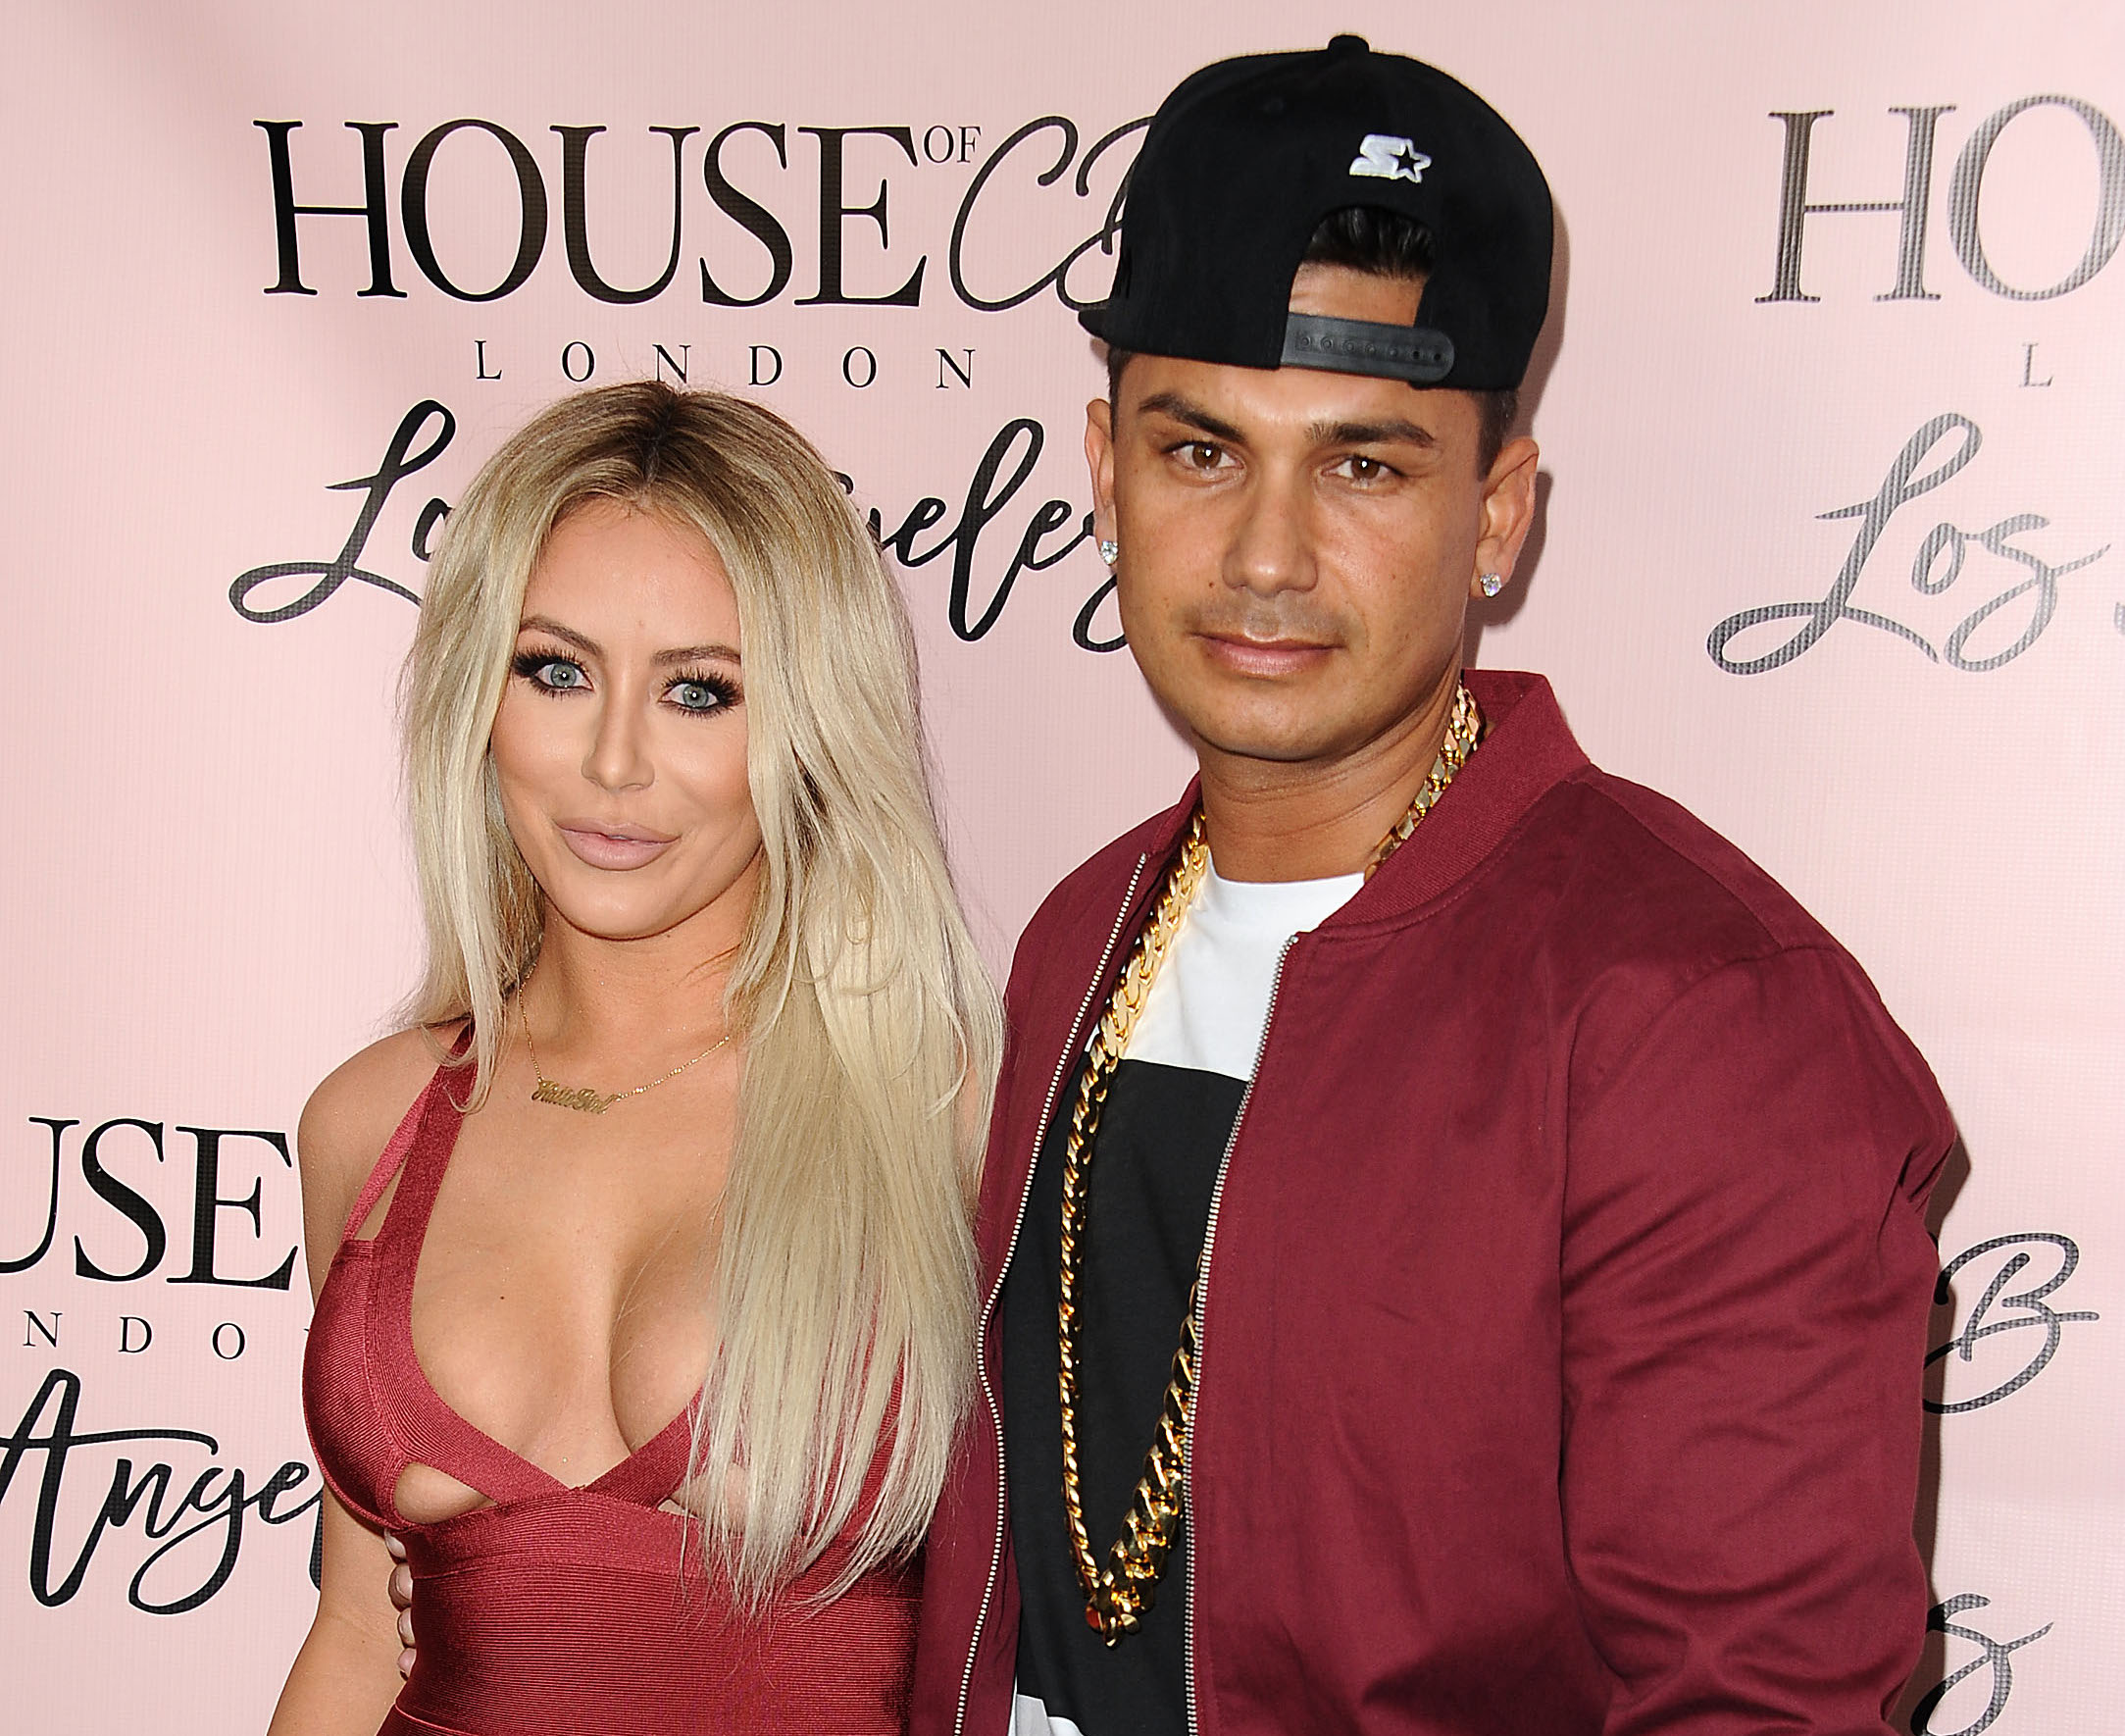 Who is aubrey o'day dating now